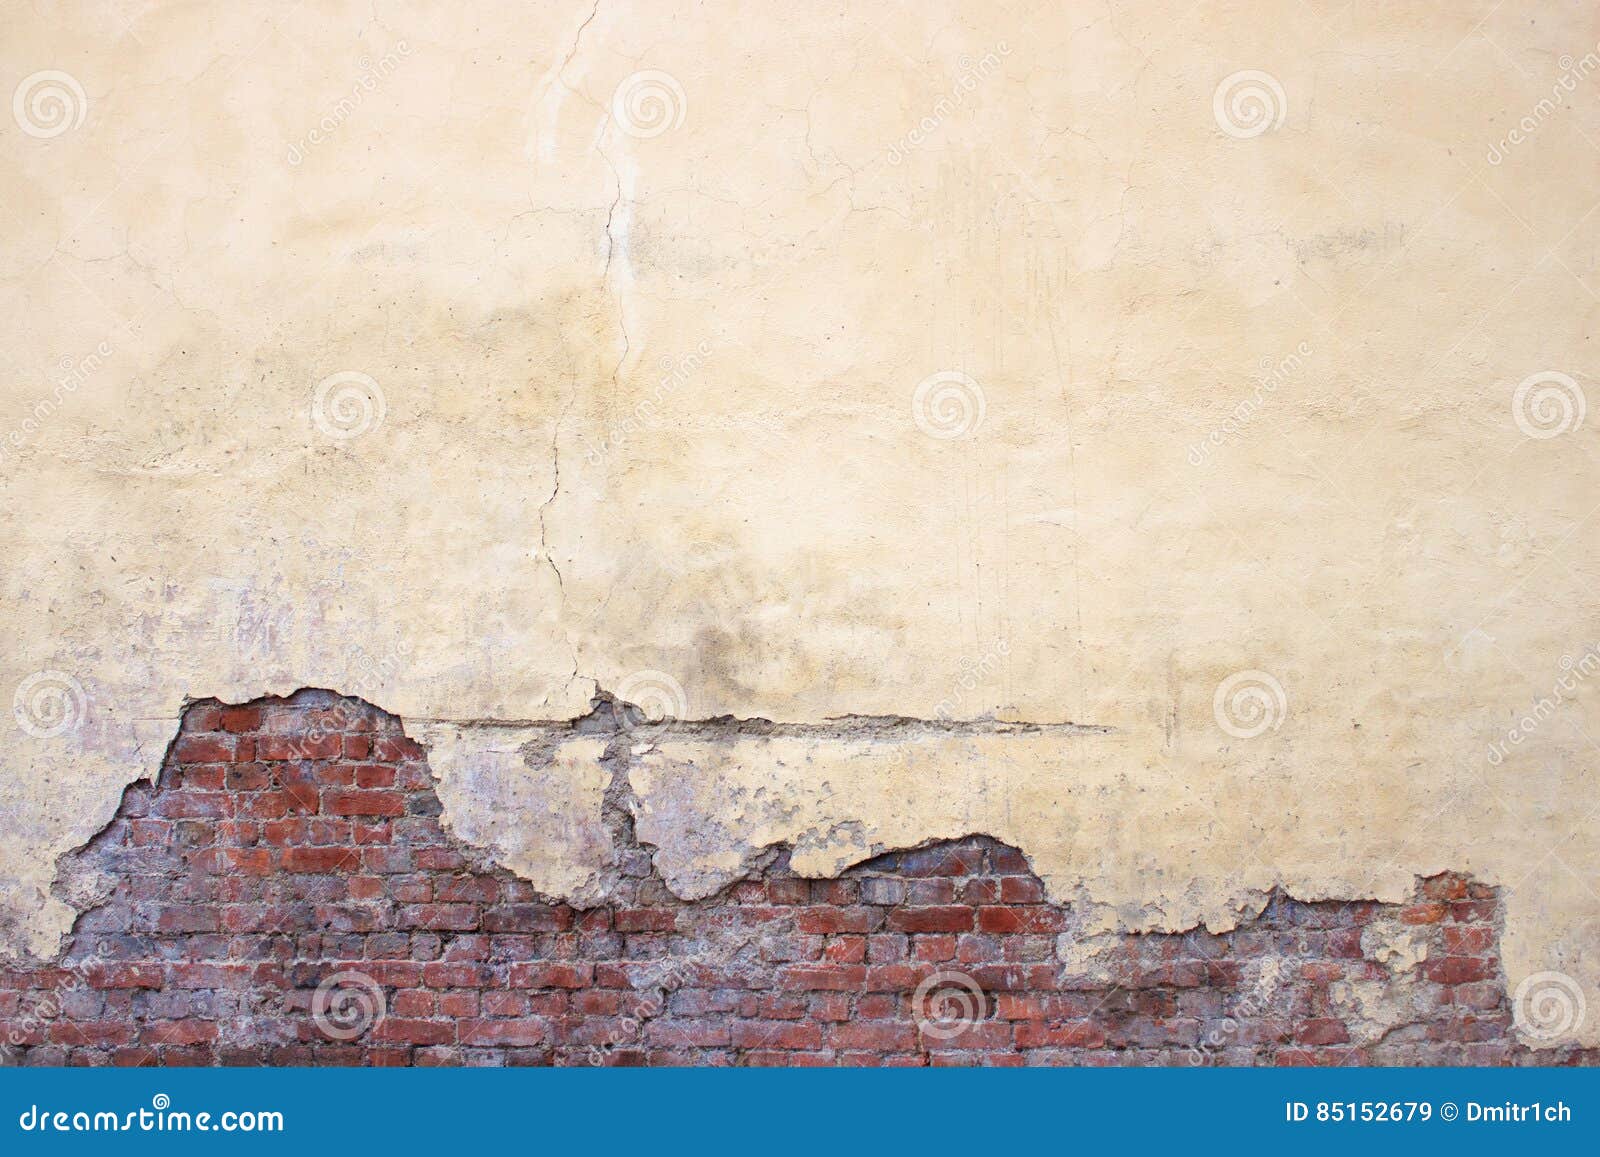 old brick wall with peeling plaster, grunge background